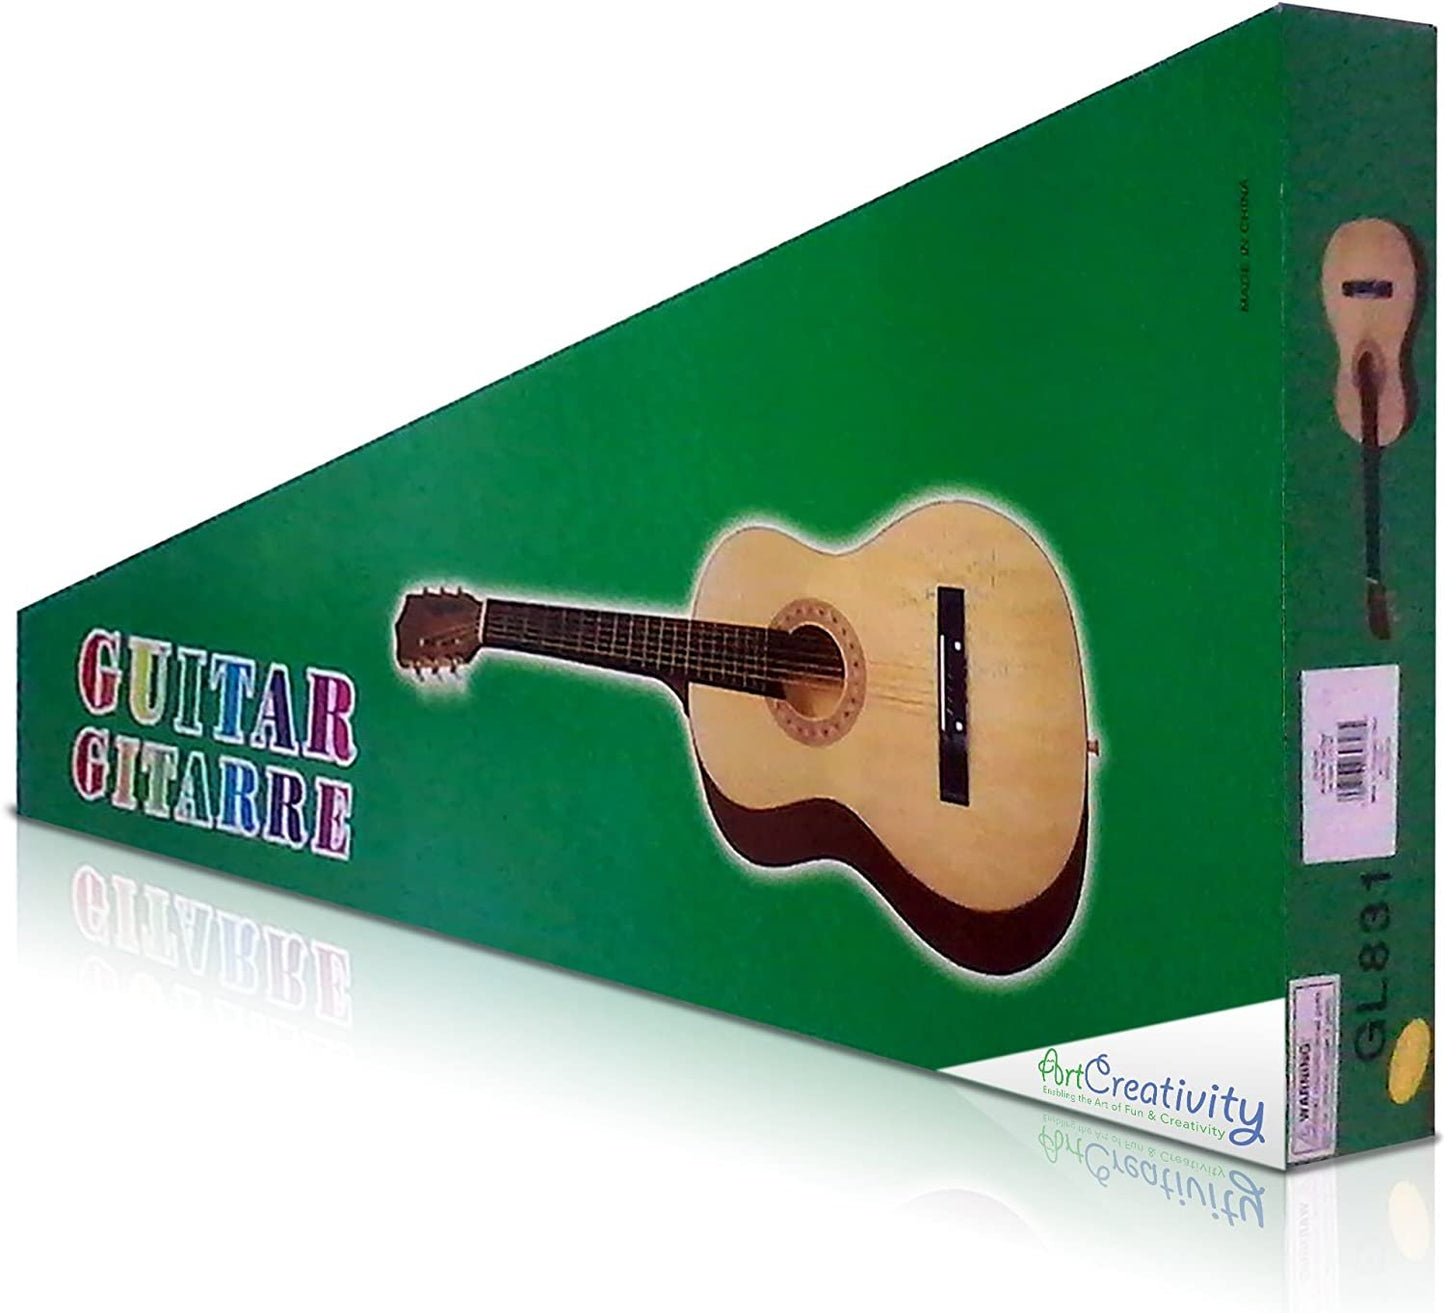 ArtCreativity Huge 6-String Acoustic Guitar - 38 Inches Tall - Colors May Vary - Amazing Gift Idea for Boys and Girls 12+